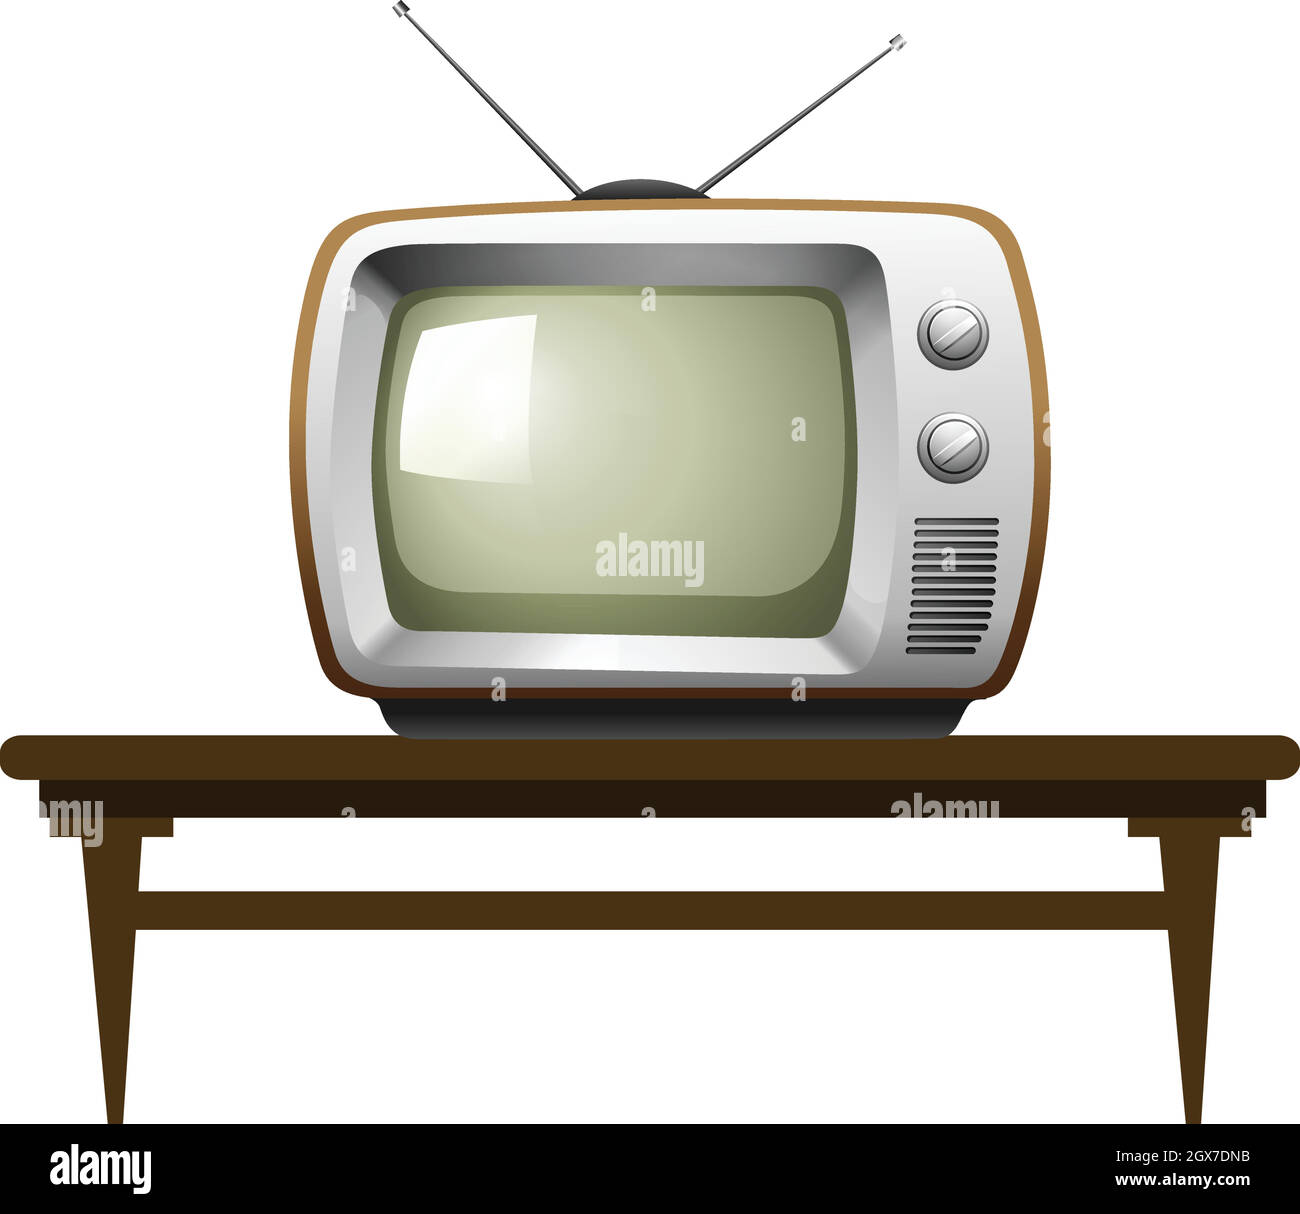 Television Stock Vector